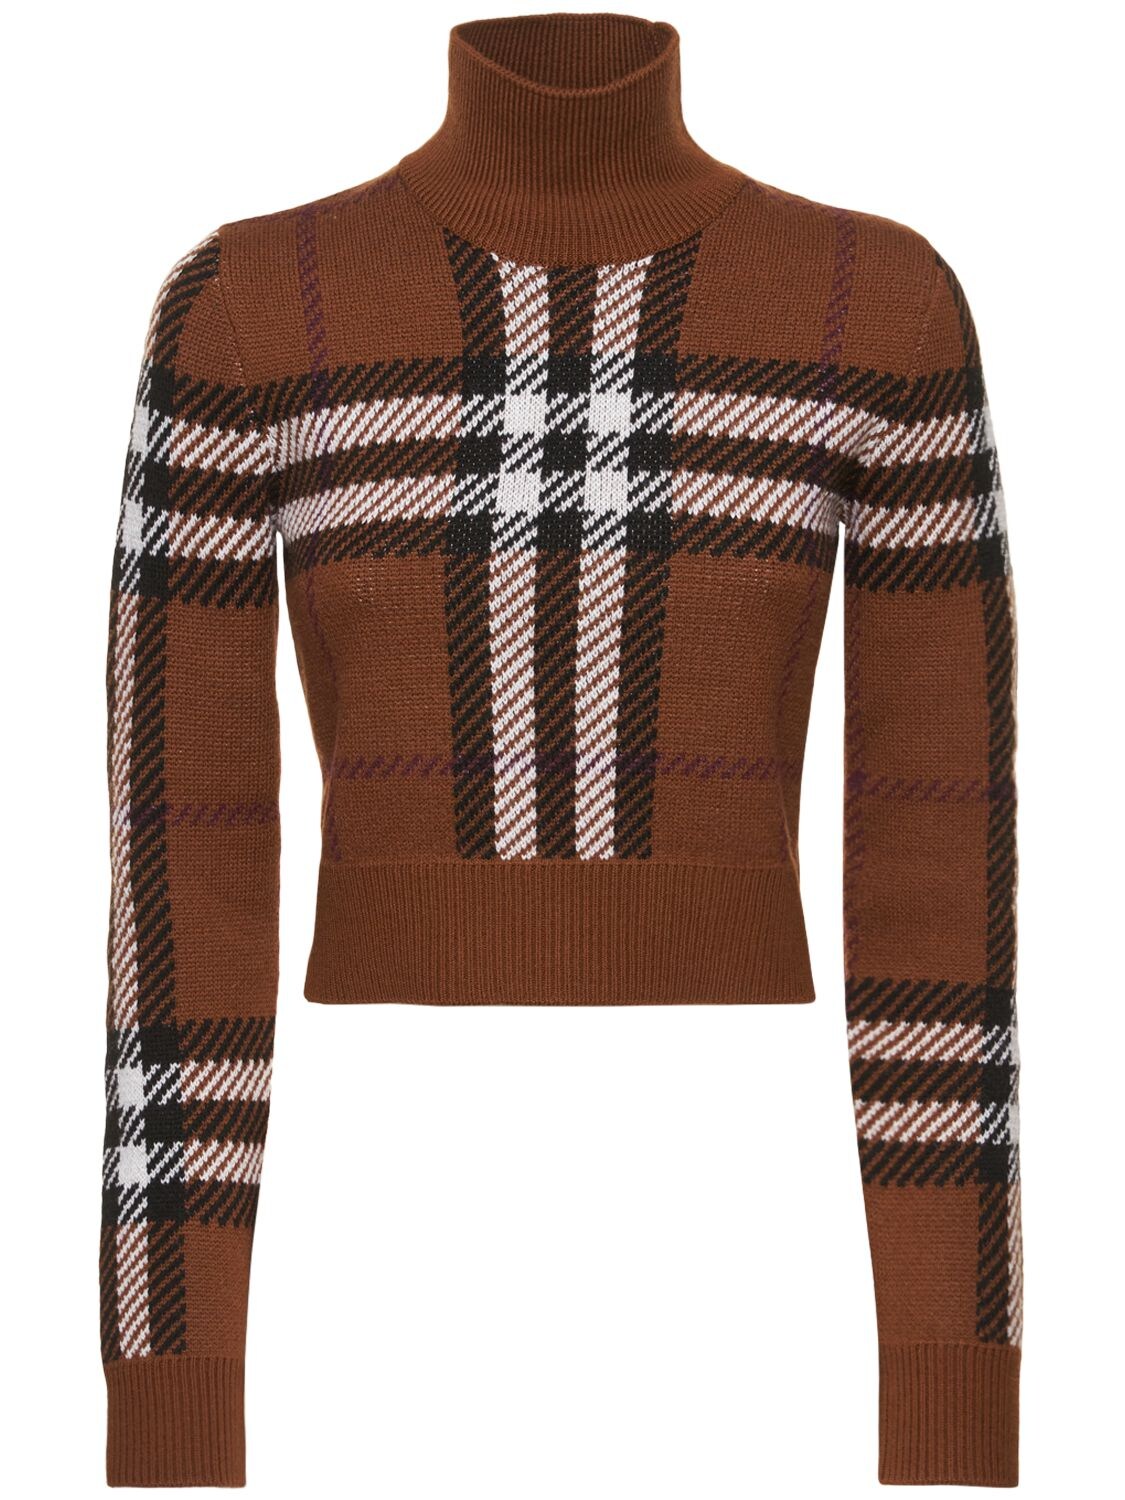 BURBERRY KERRY CHECK WOOL KNIT TURTLENECK